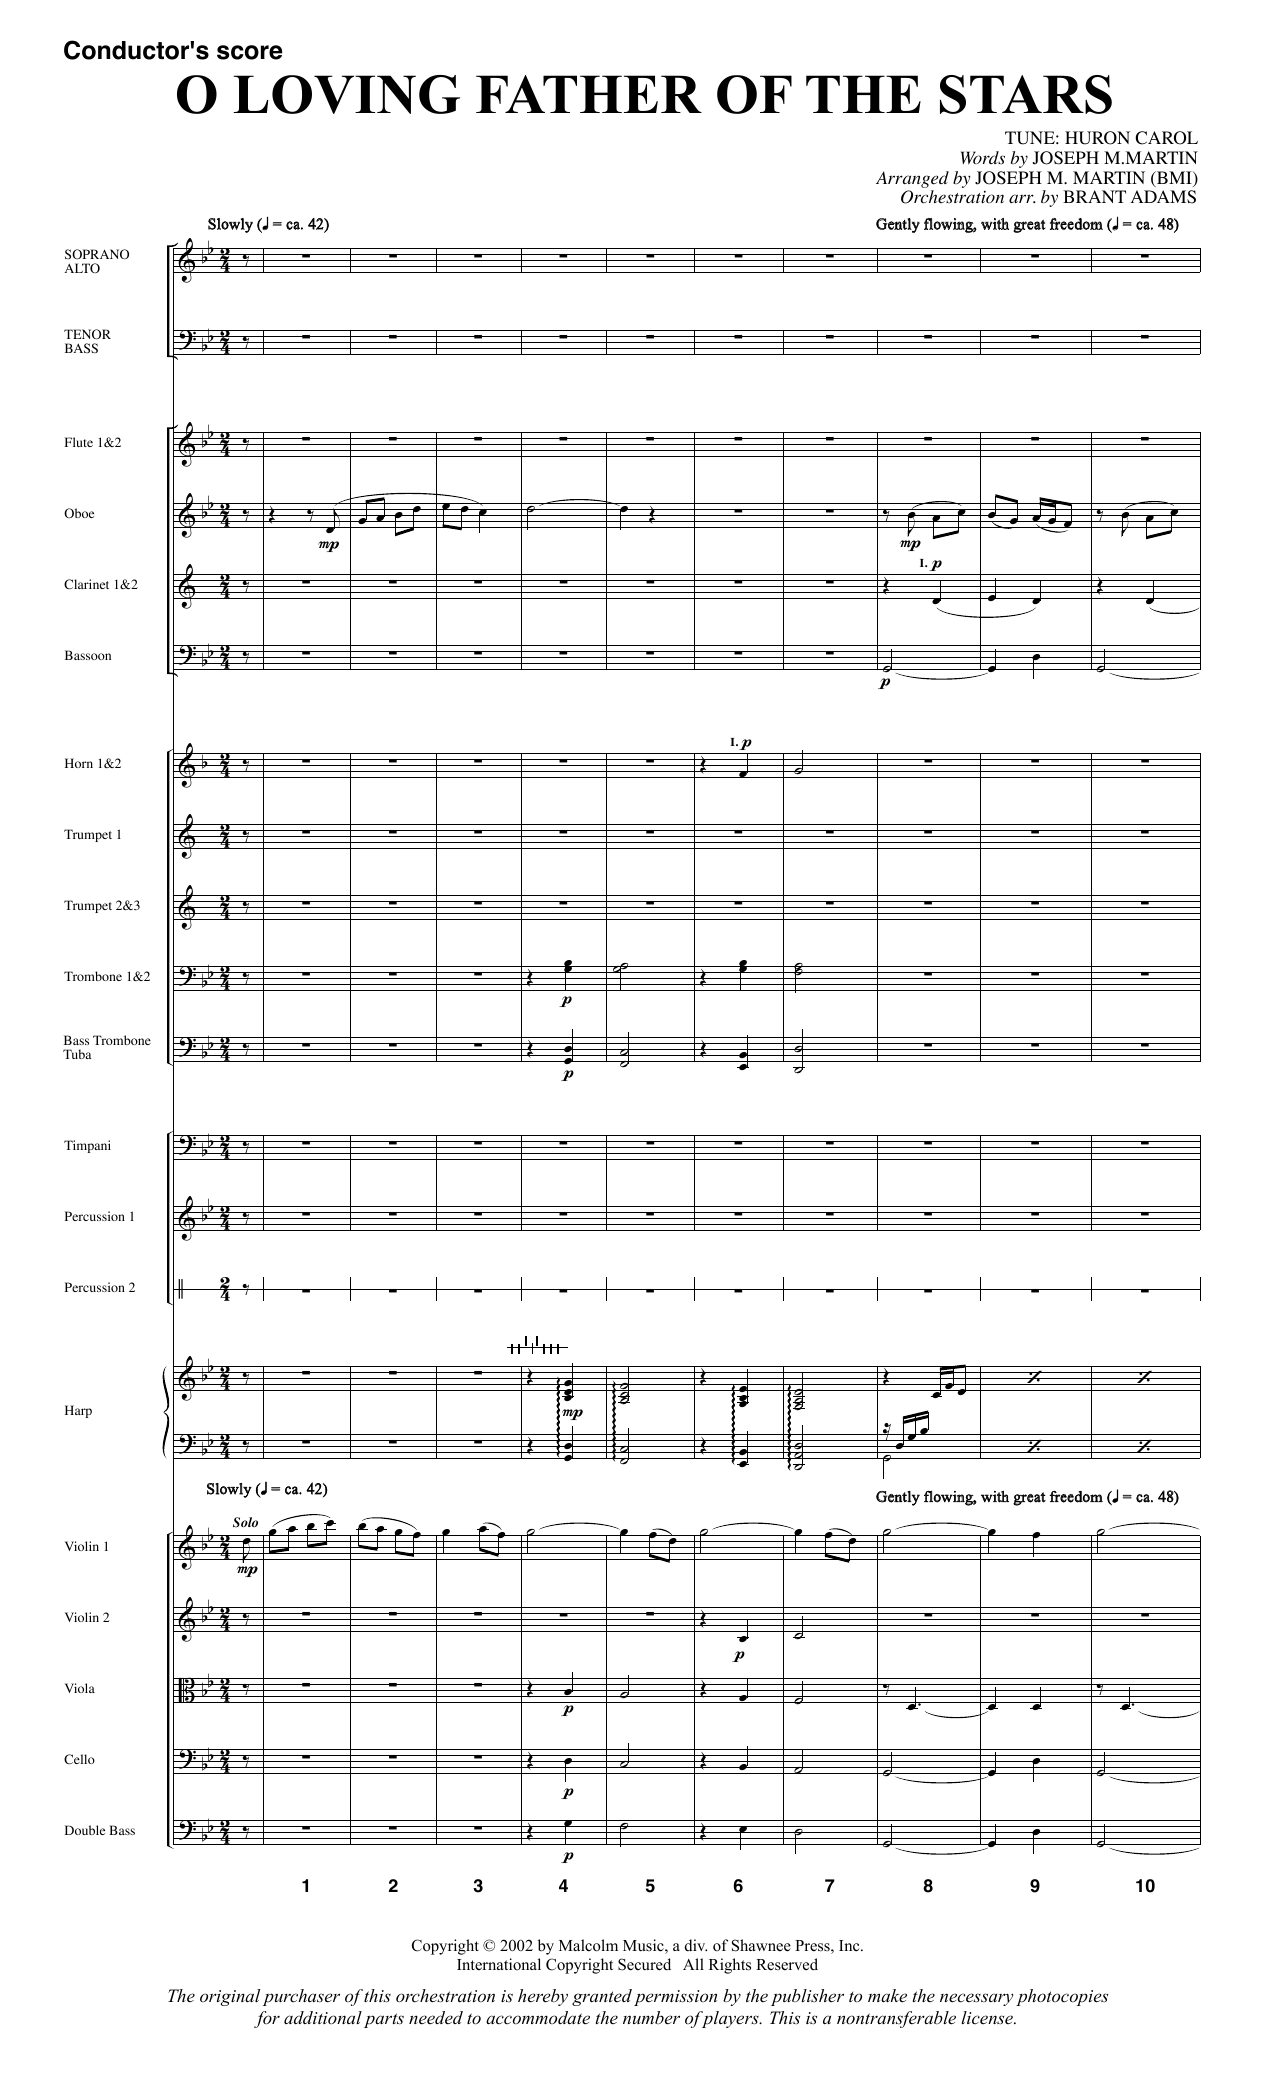 Joseph M. Martin O Loving Father Of The Stars (from Morning Star) - Full Score sheet music notes and chords. Download Printable PDF.